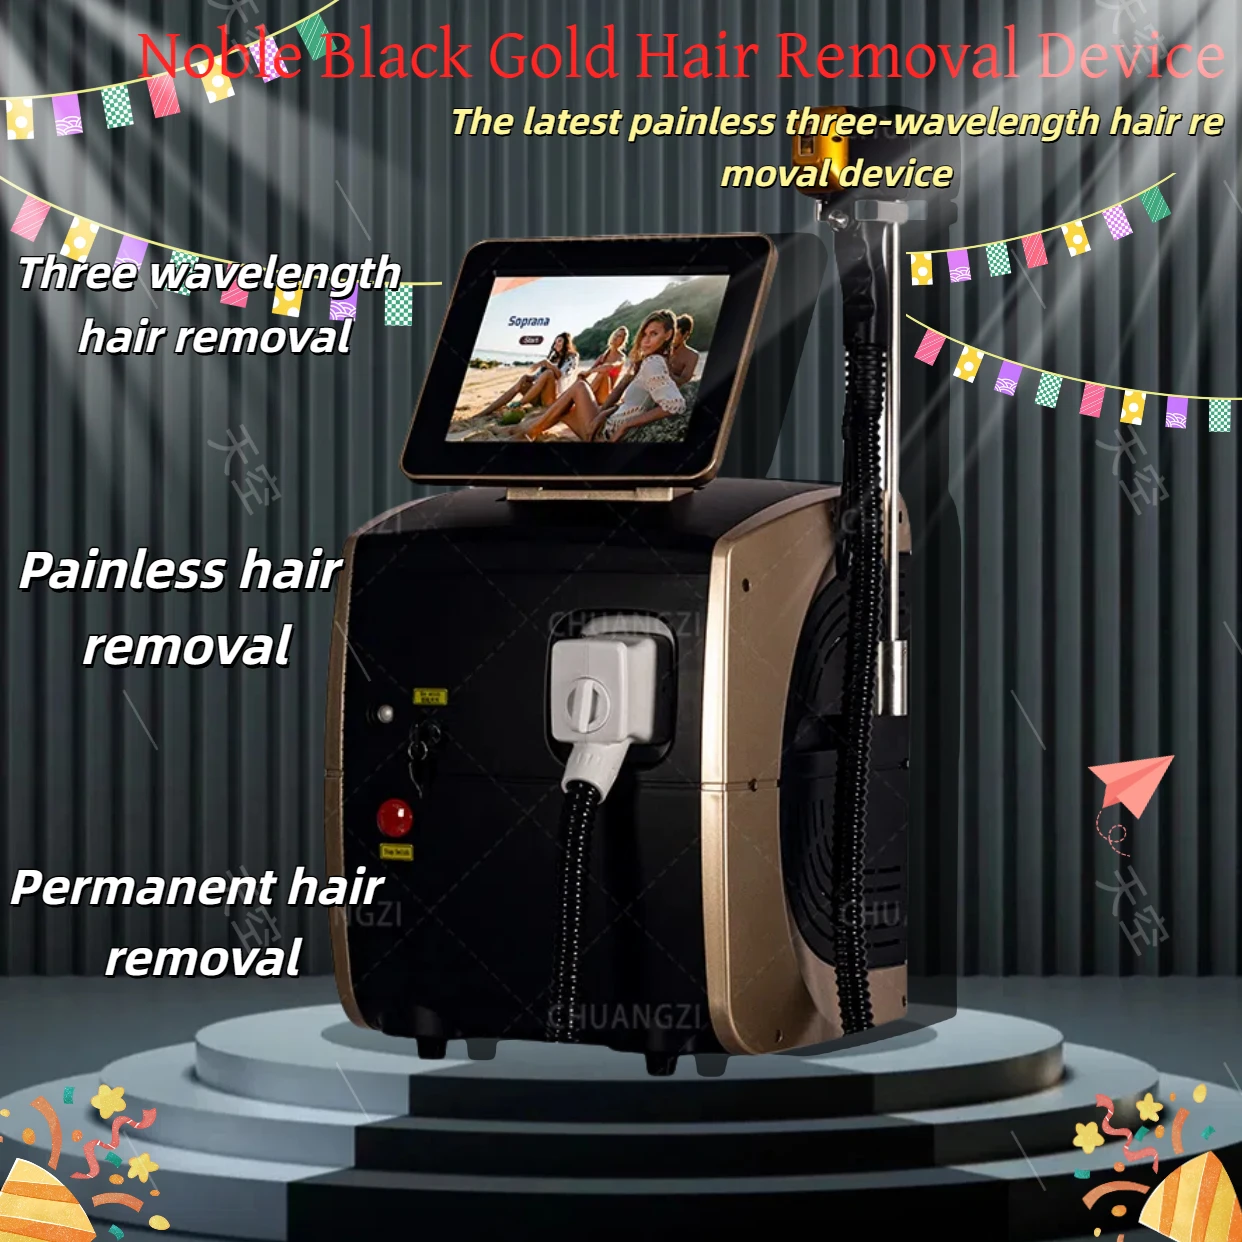 

Professional 3000W High Power 755nm 808nm 1064nm Diode Laser Hair Removal Machine Ice Titanium Painless Epilator For Salon